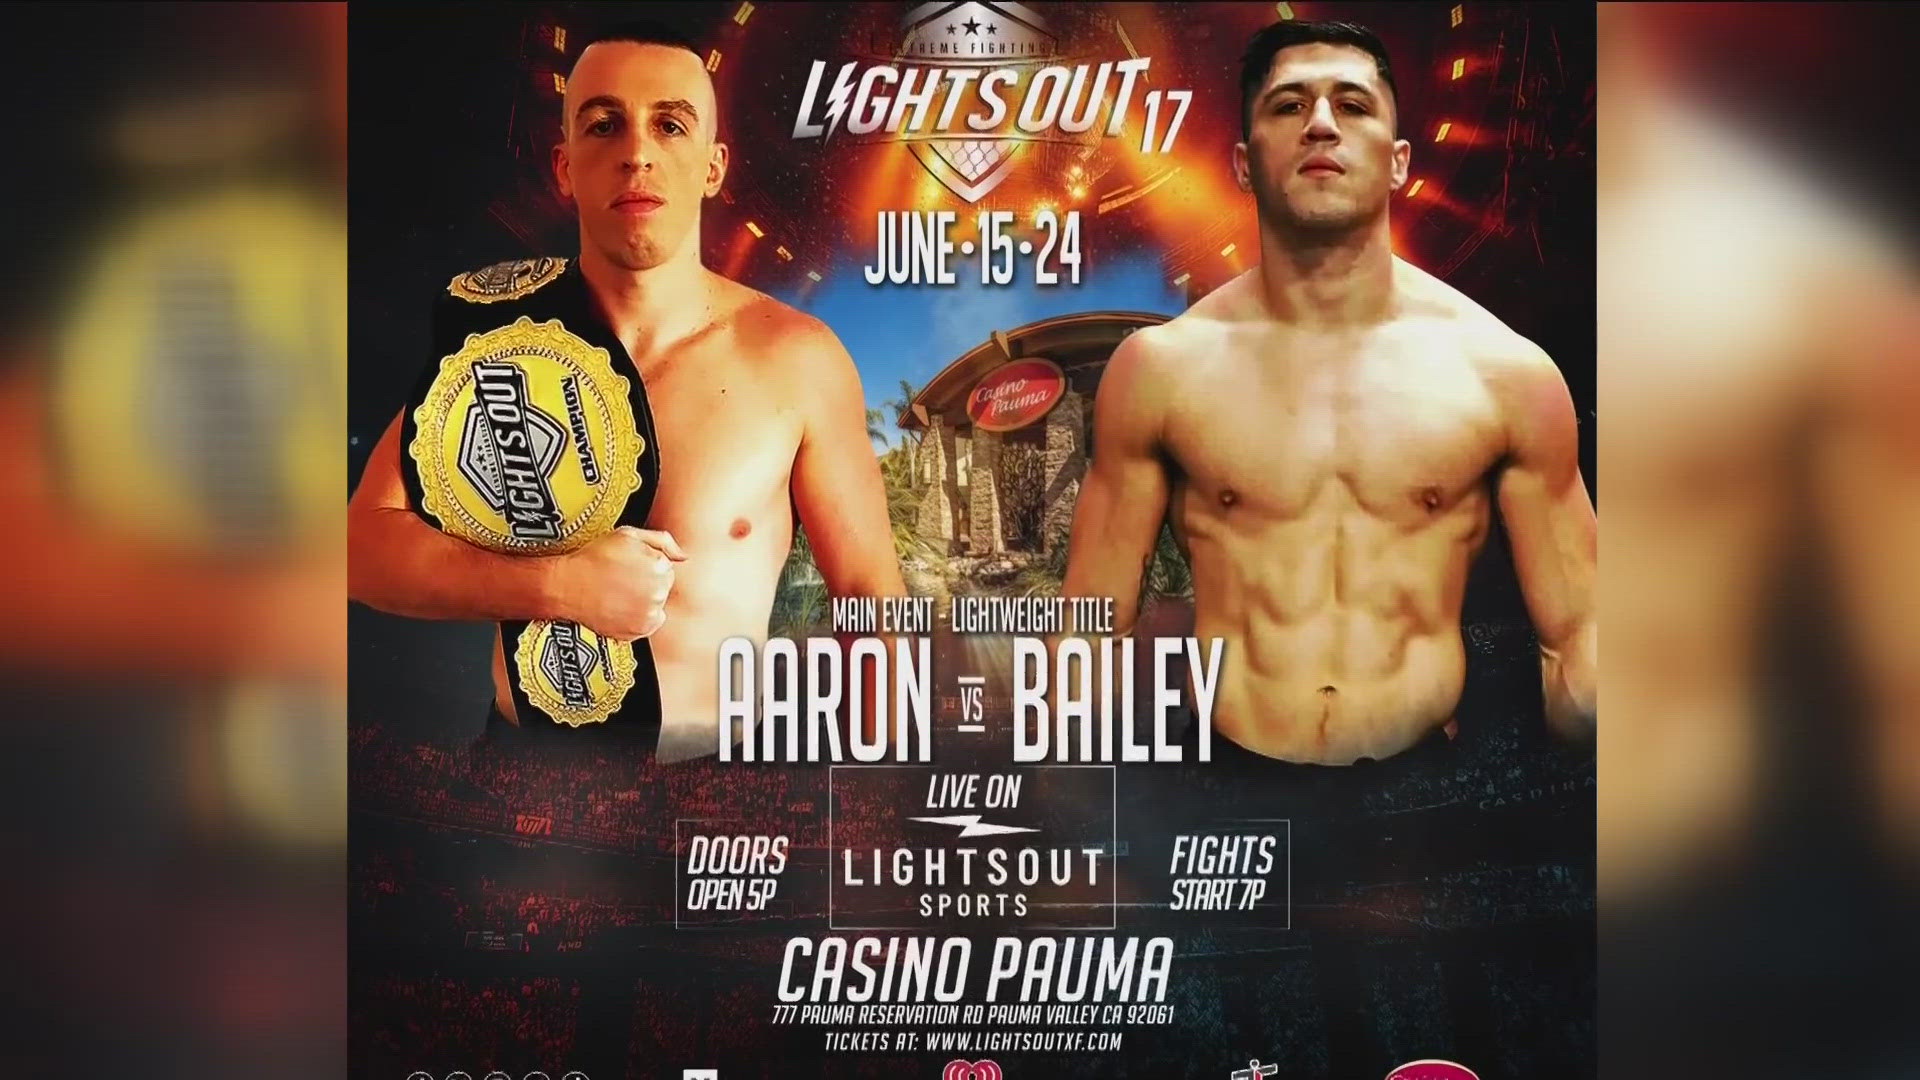 You can watch Lightsout Xtreme Fighting on June 15.